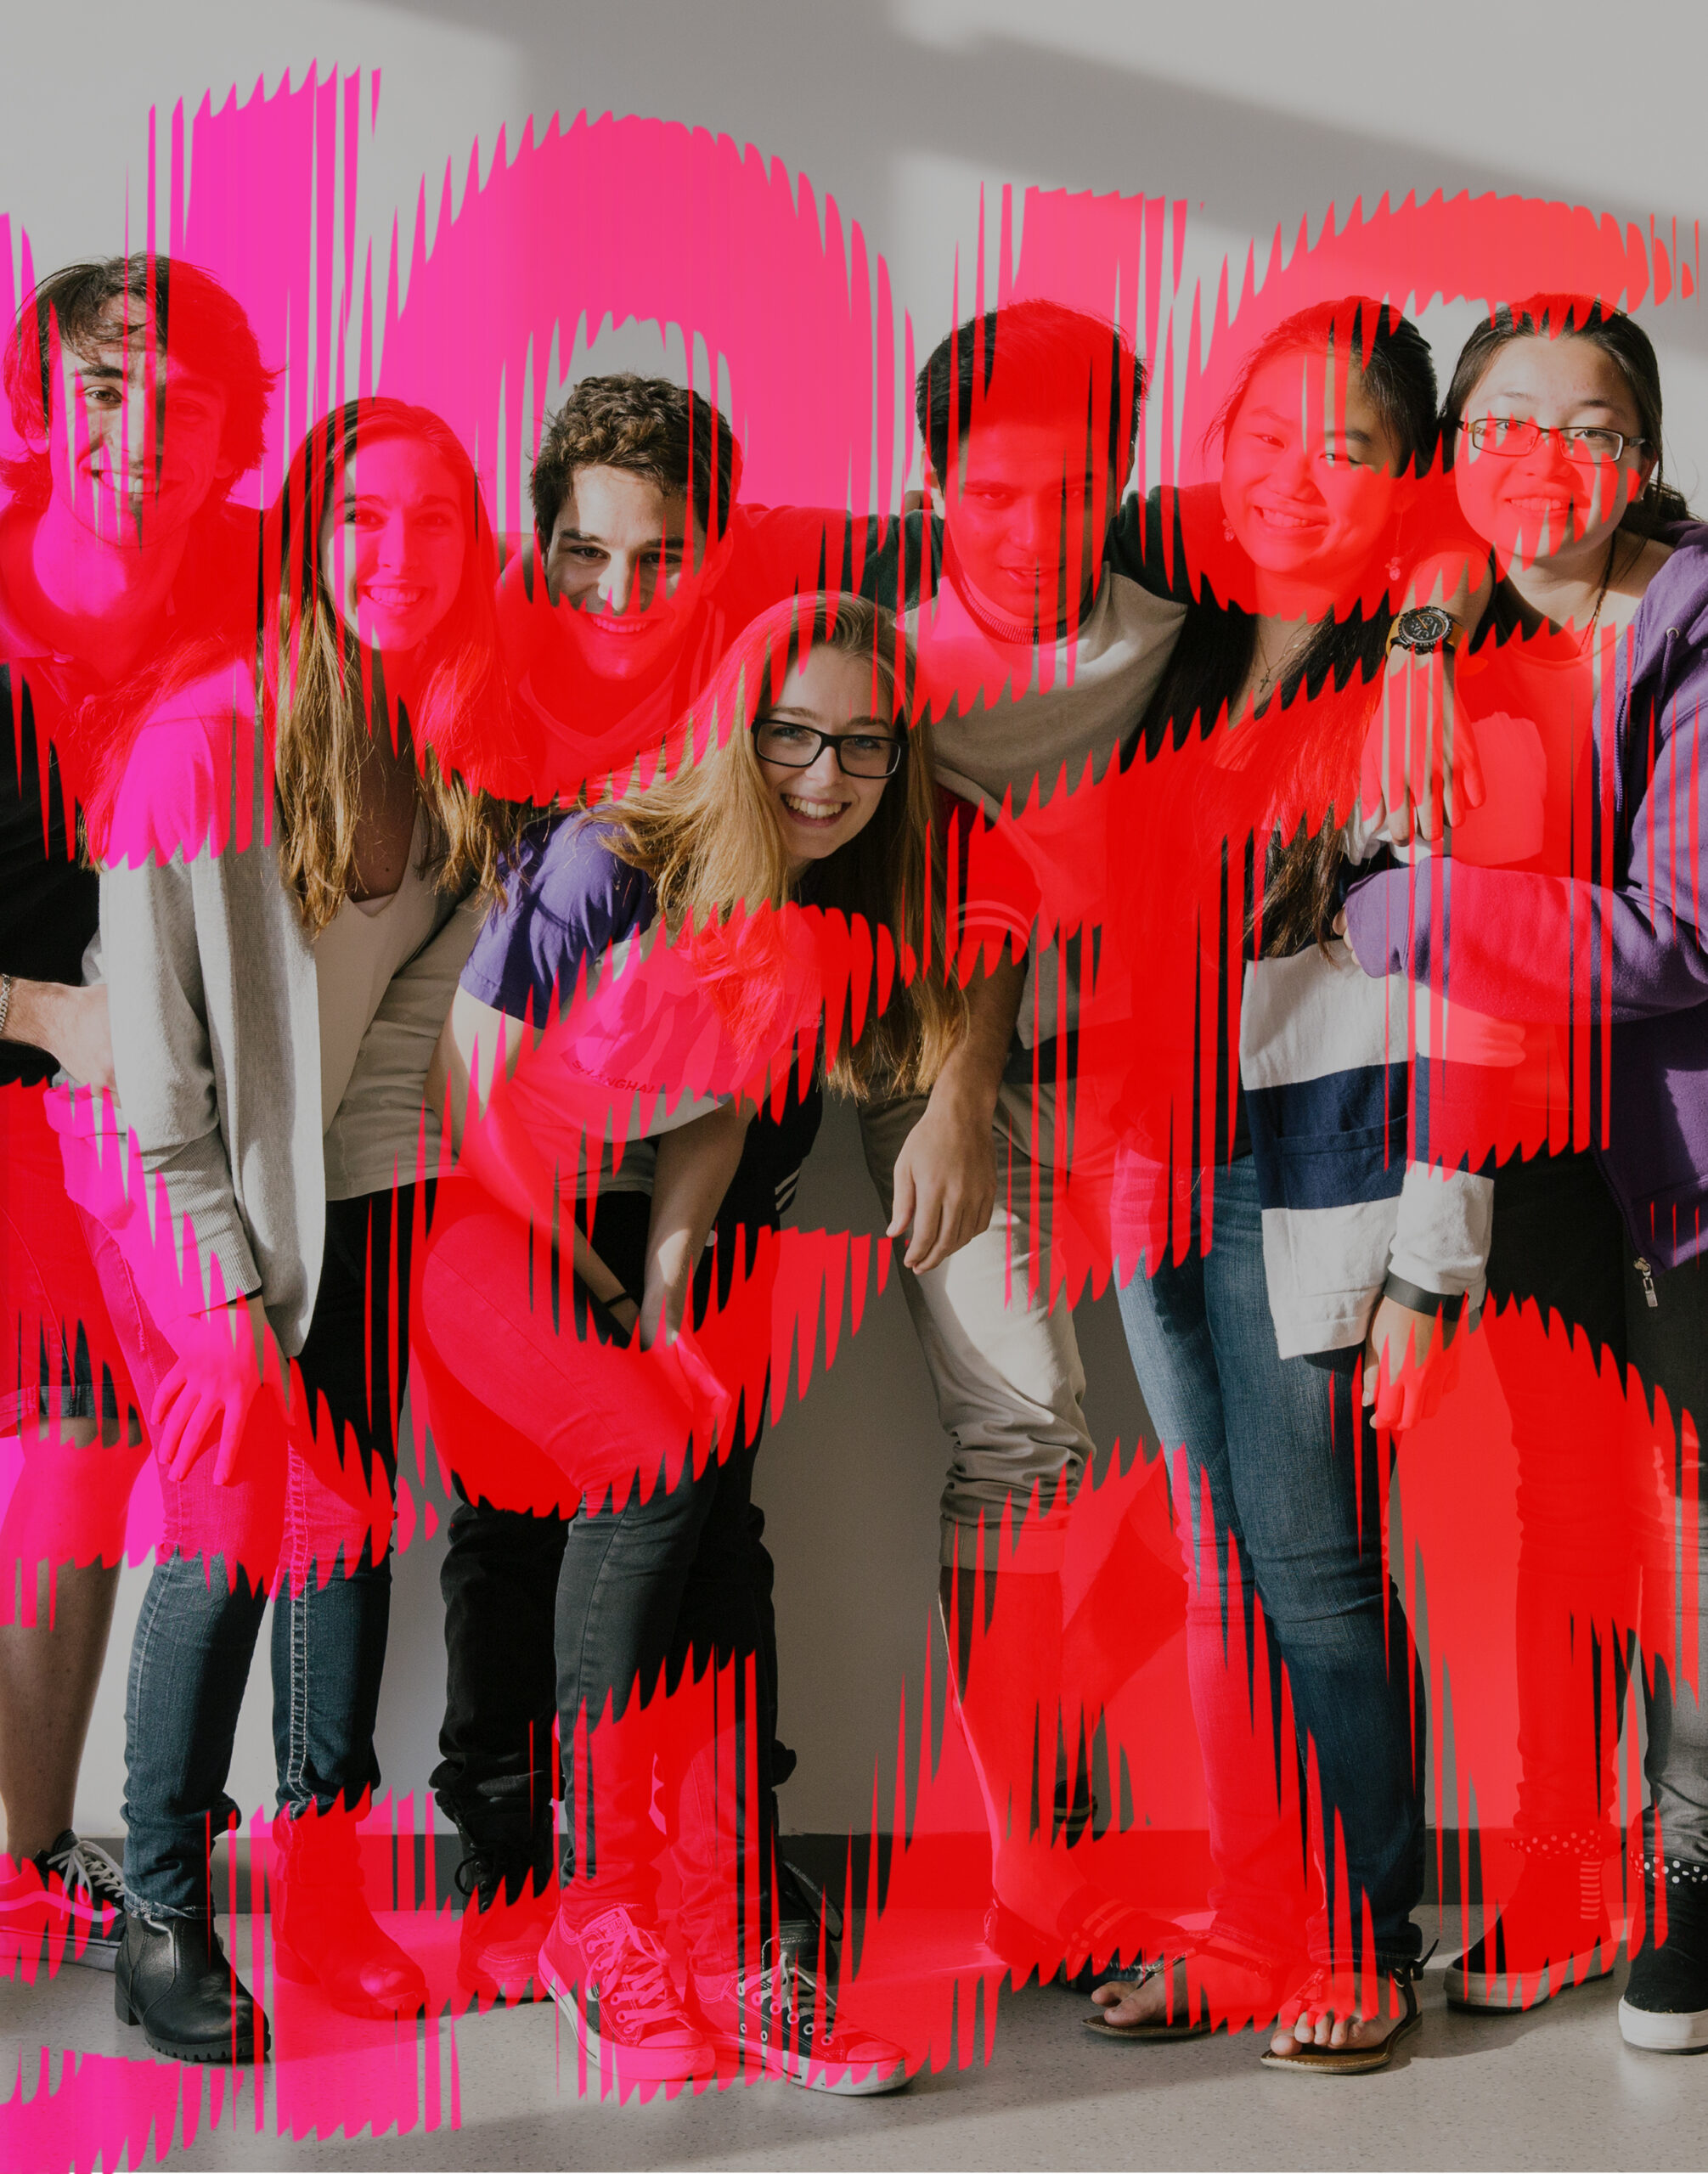 A group of students posing together with a red overlay of the words “Voice,” “Action,” and “Change.”